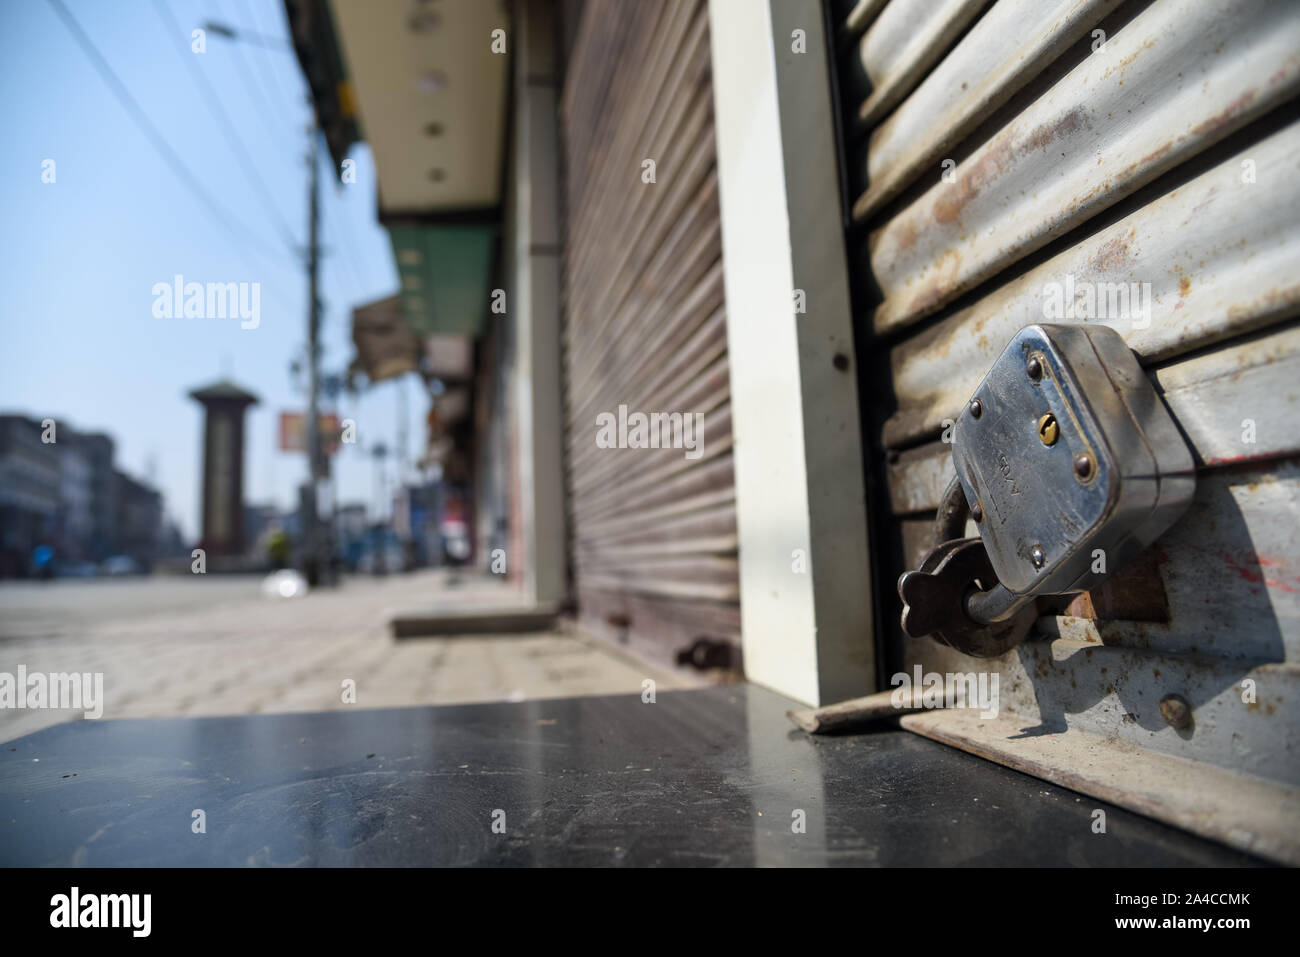 Srinagar, India. 11th Oct, 2019. Closed shops at city centre during the demonstration.After Friday prayers hundreds of people took part in a demonstration in the Soura neighborhood. Tensions have been escalating since the Indian government removed the region's partial autonomy three weeks ago. Information has also been scarce, as internet and mobile networks have been blocked. Credit: SOPA Images Limited/Alamy Live News Stock Photo